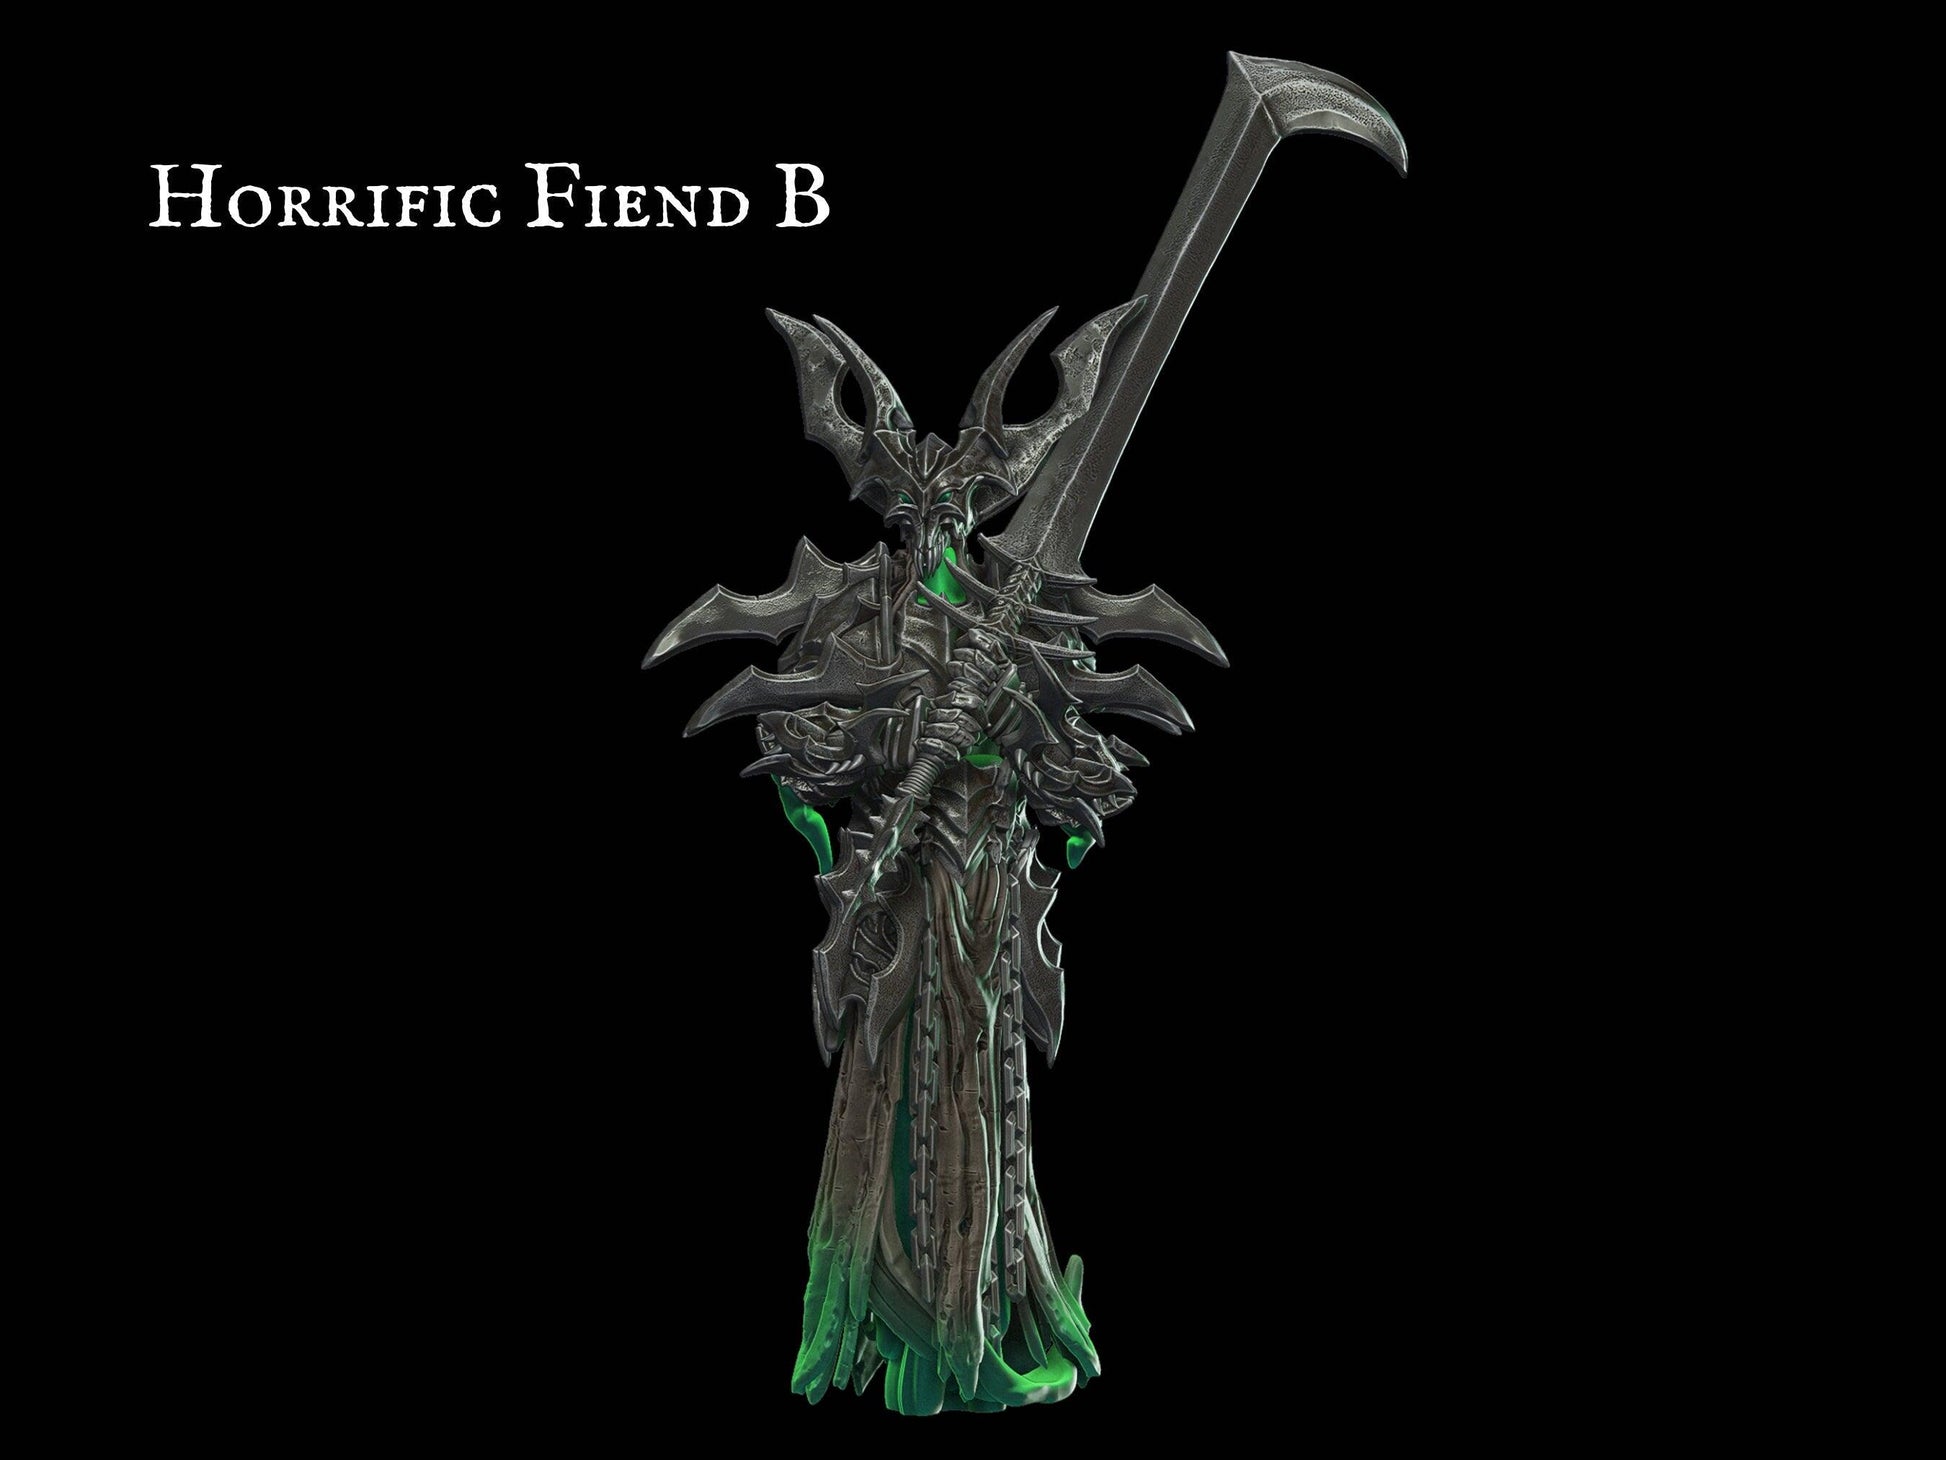 Horrific Fiend Miniature 28mm scale Tabletop gaming DnD Miniature Dungeons and Dragons dnd 5e dungeon master gift - Plague Miniatures shop for DnD Miniatures